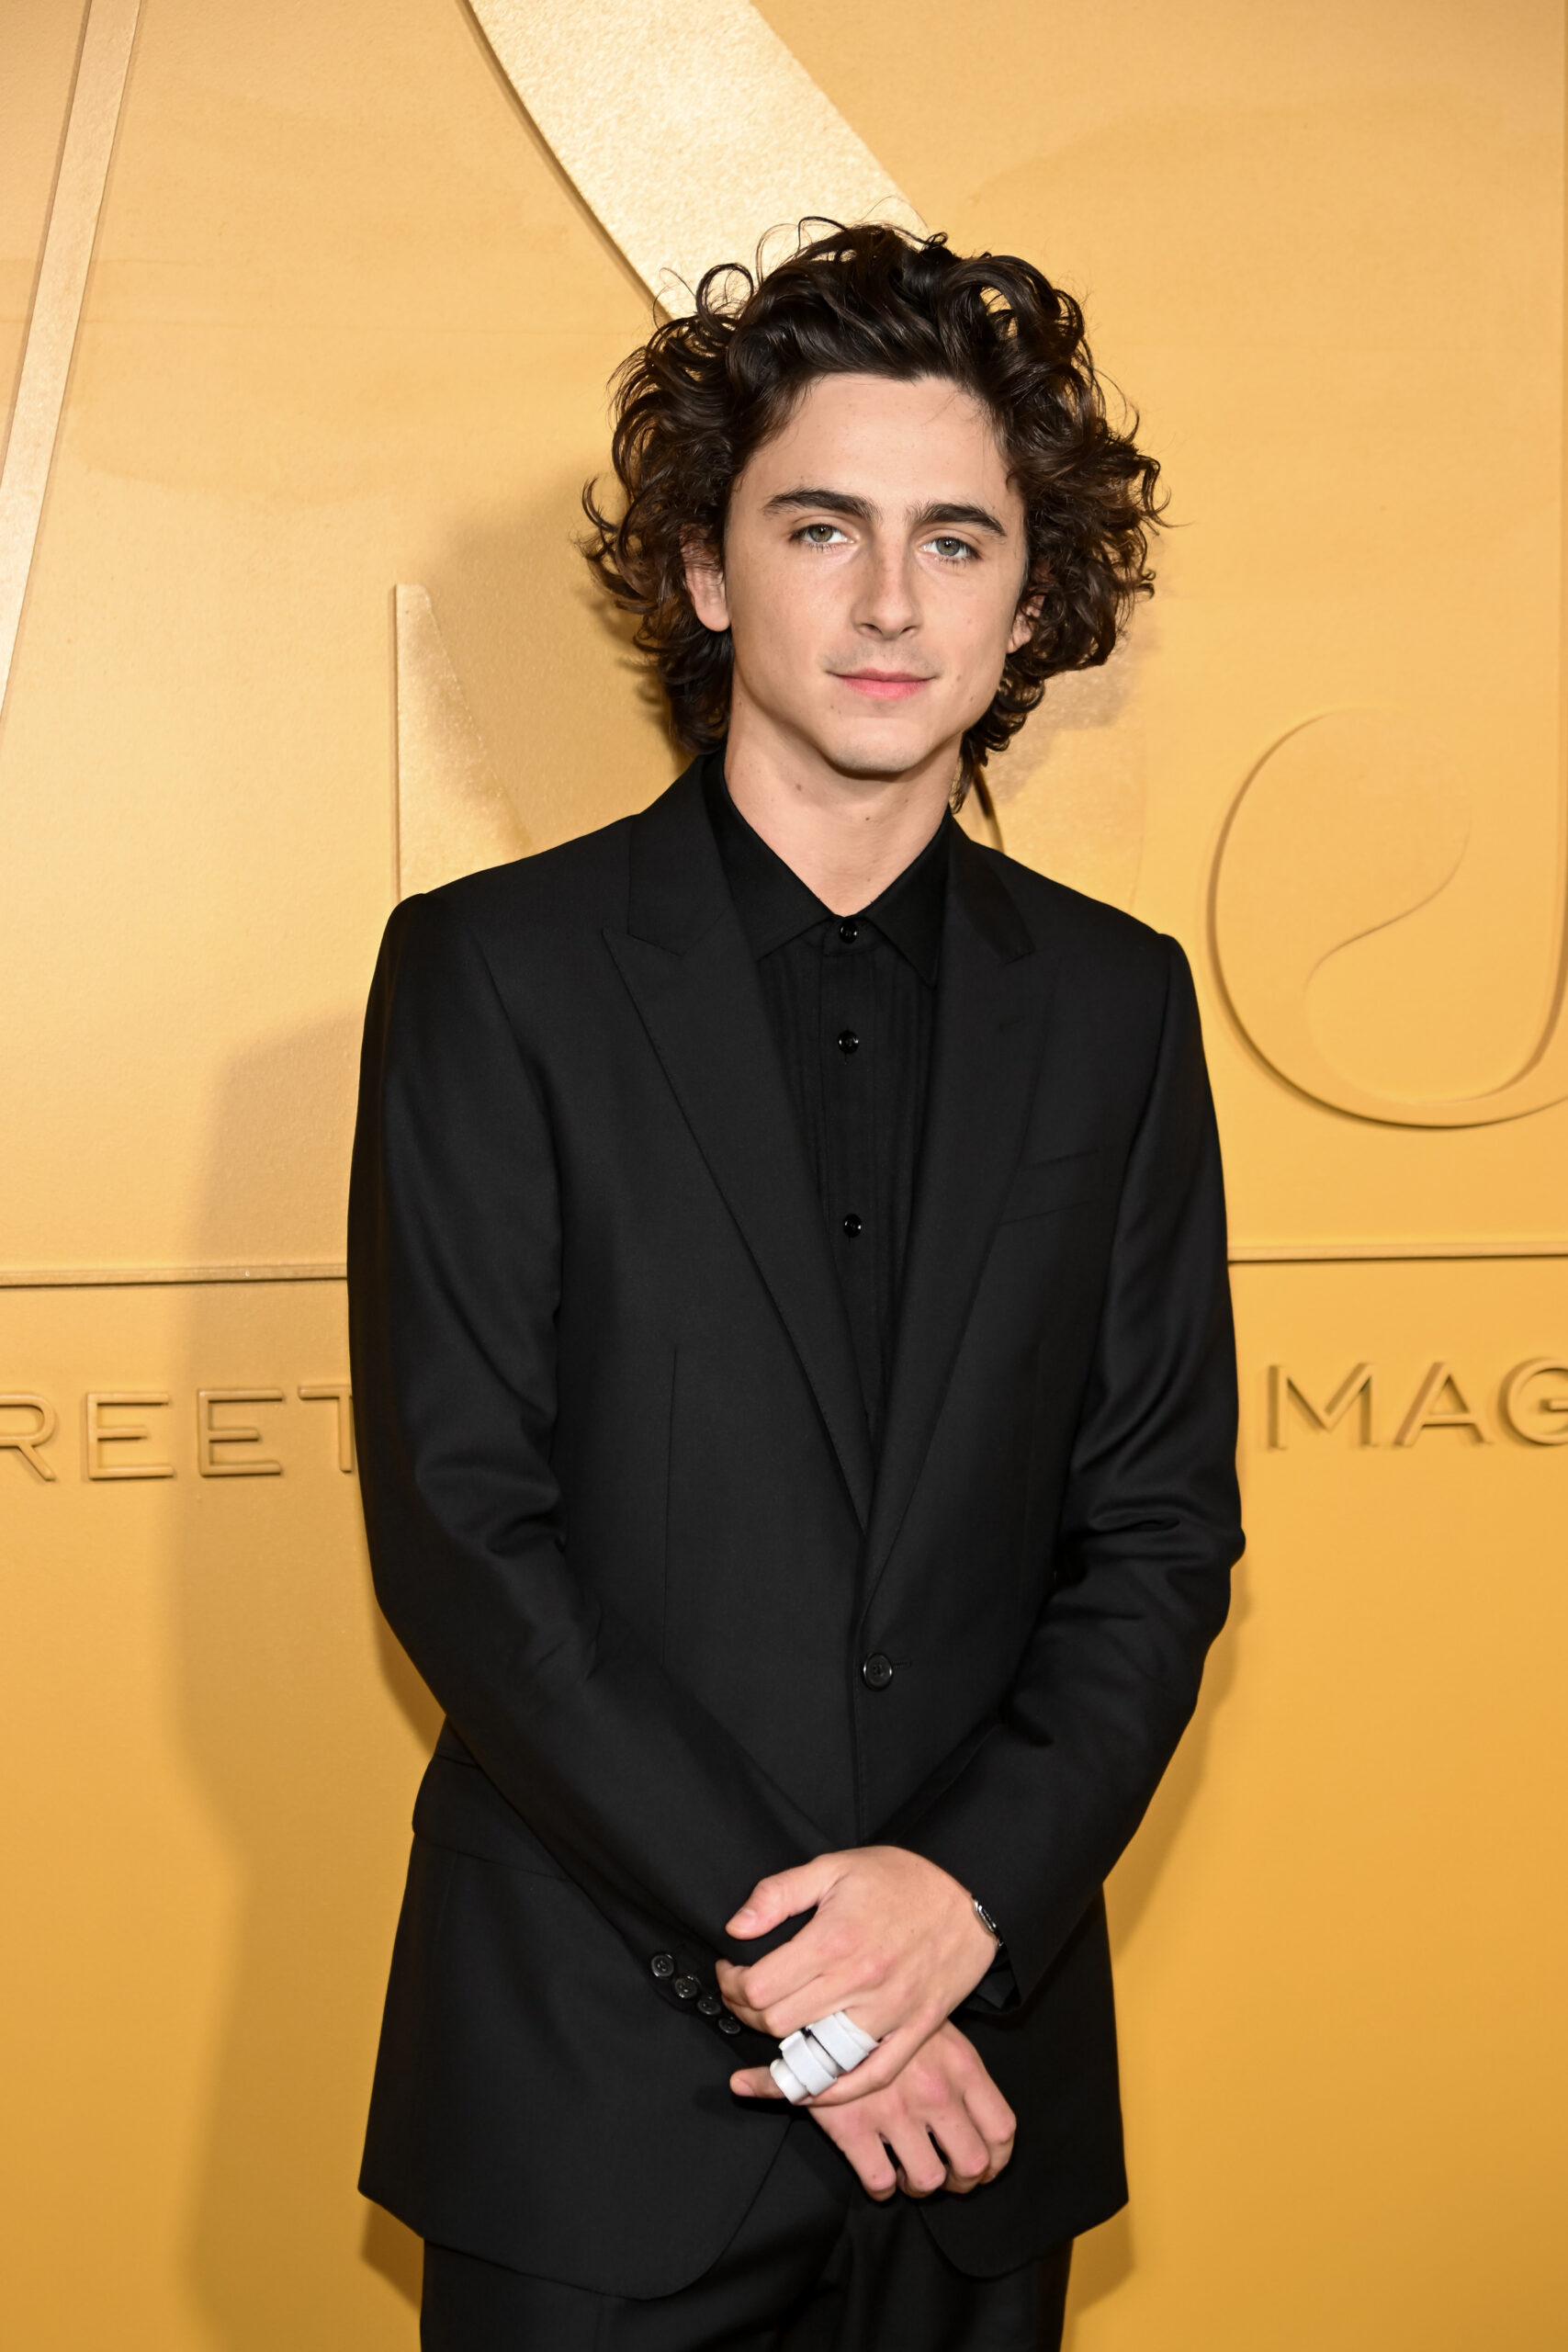 Kylie Jenner and Timothée Chalamet match in black at red carpet event amid romance